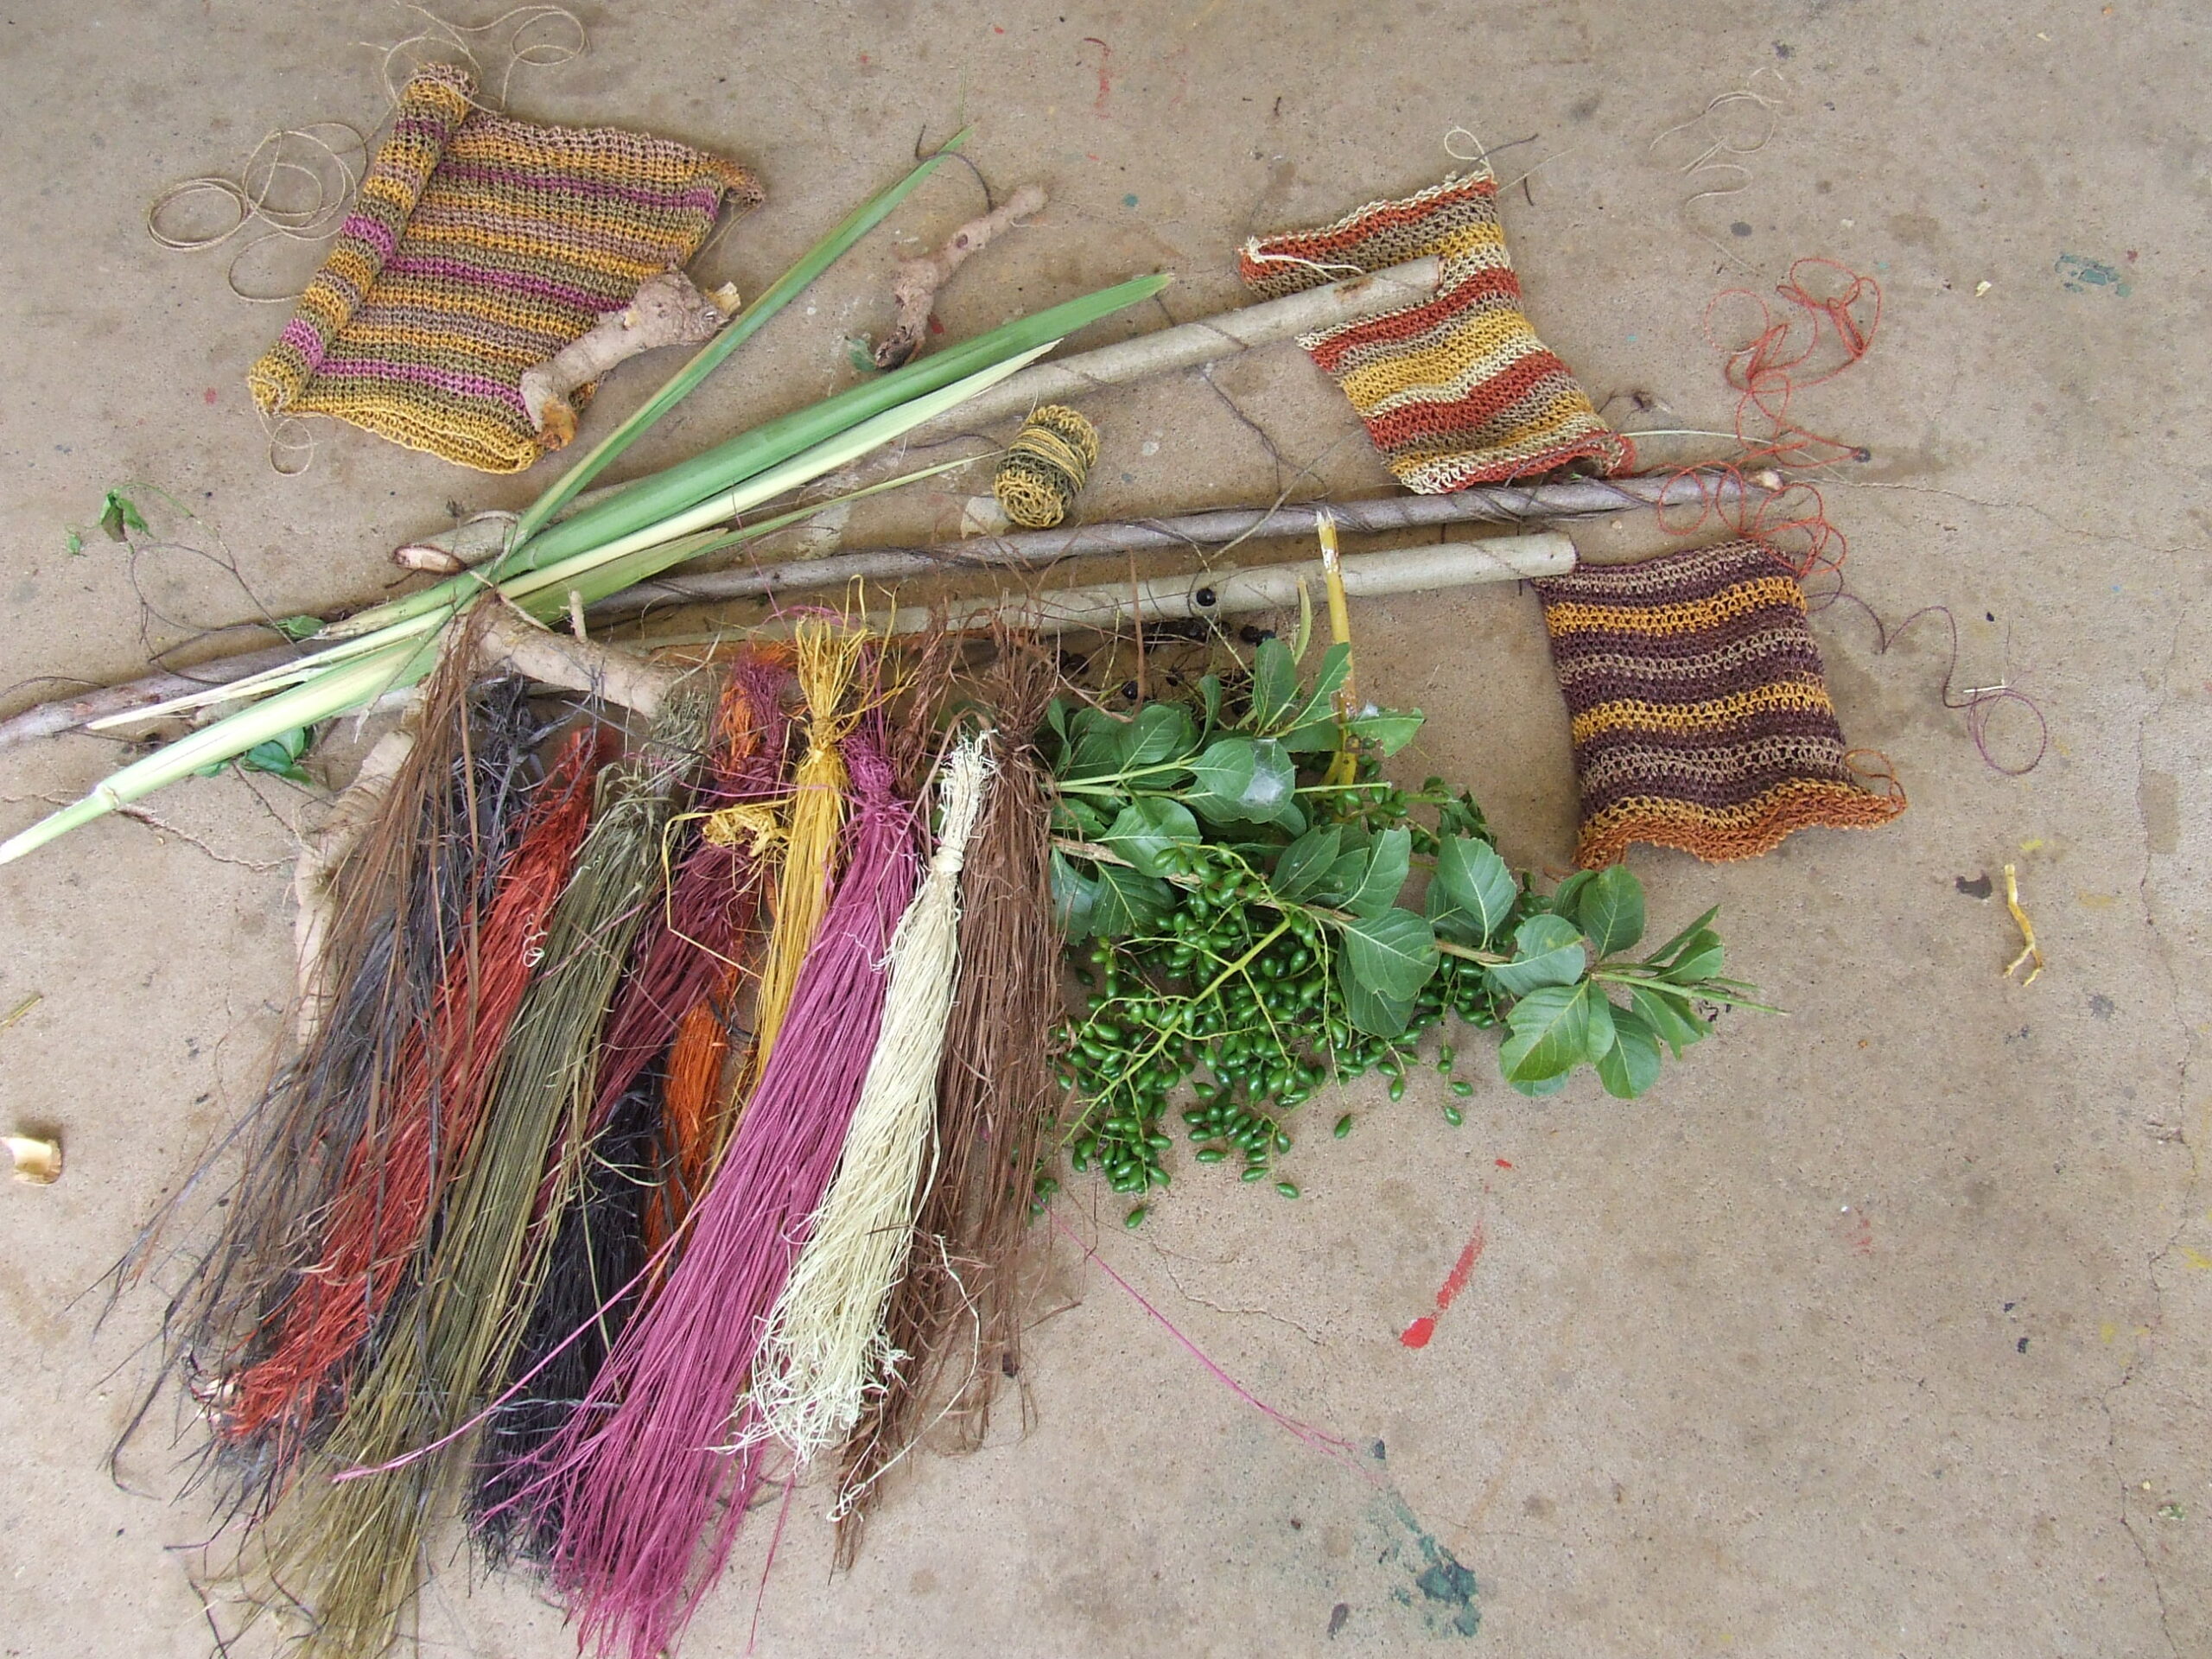 The weaving artist’s tools and products – the pandanus plant is the main tool which is then dyed through seed pods, leaves, tuber roots and flowers.